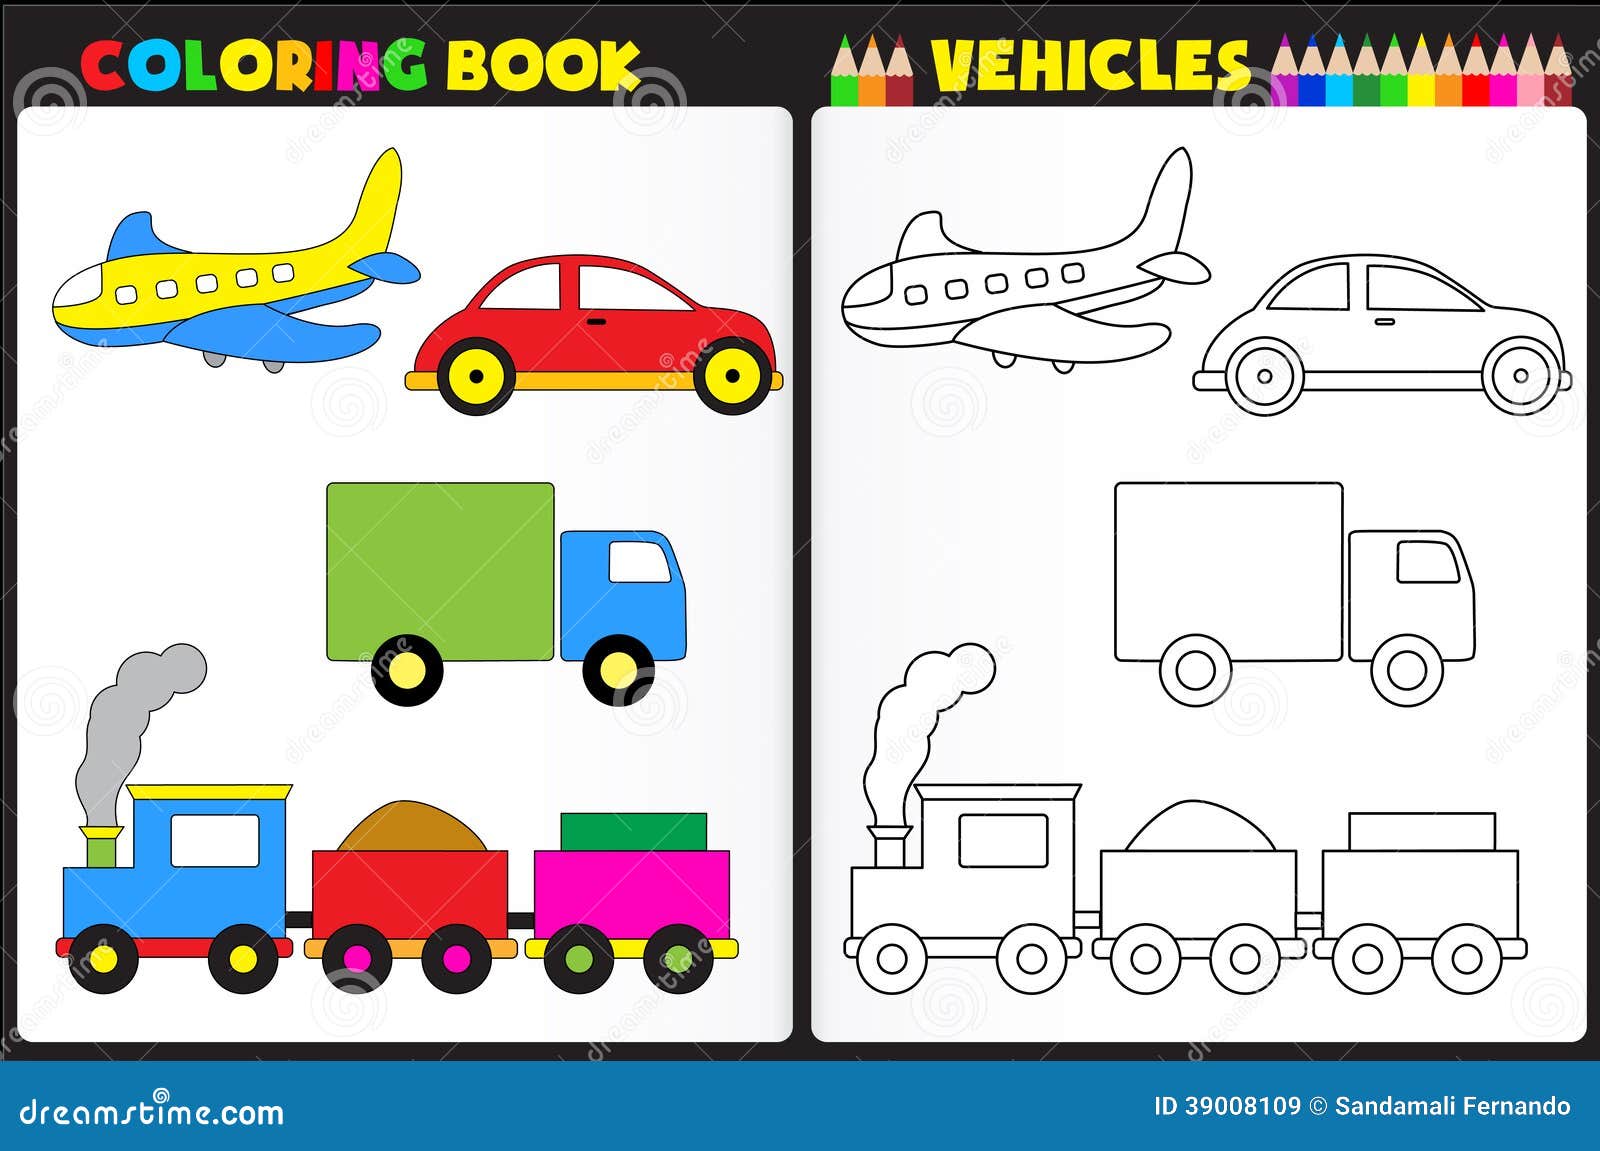 Coloring book vehicles stock vector. Illustration of design   20